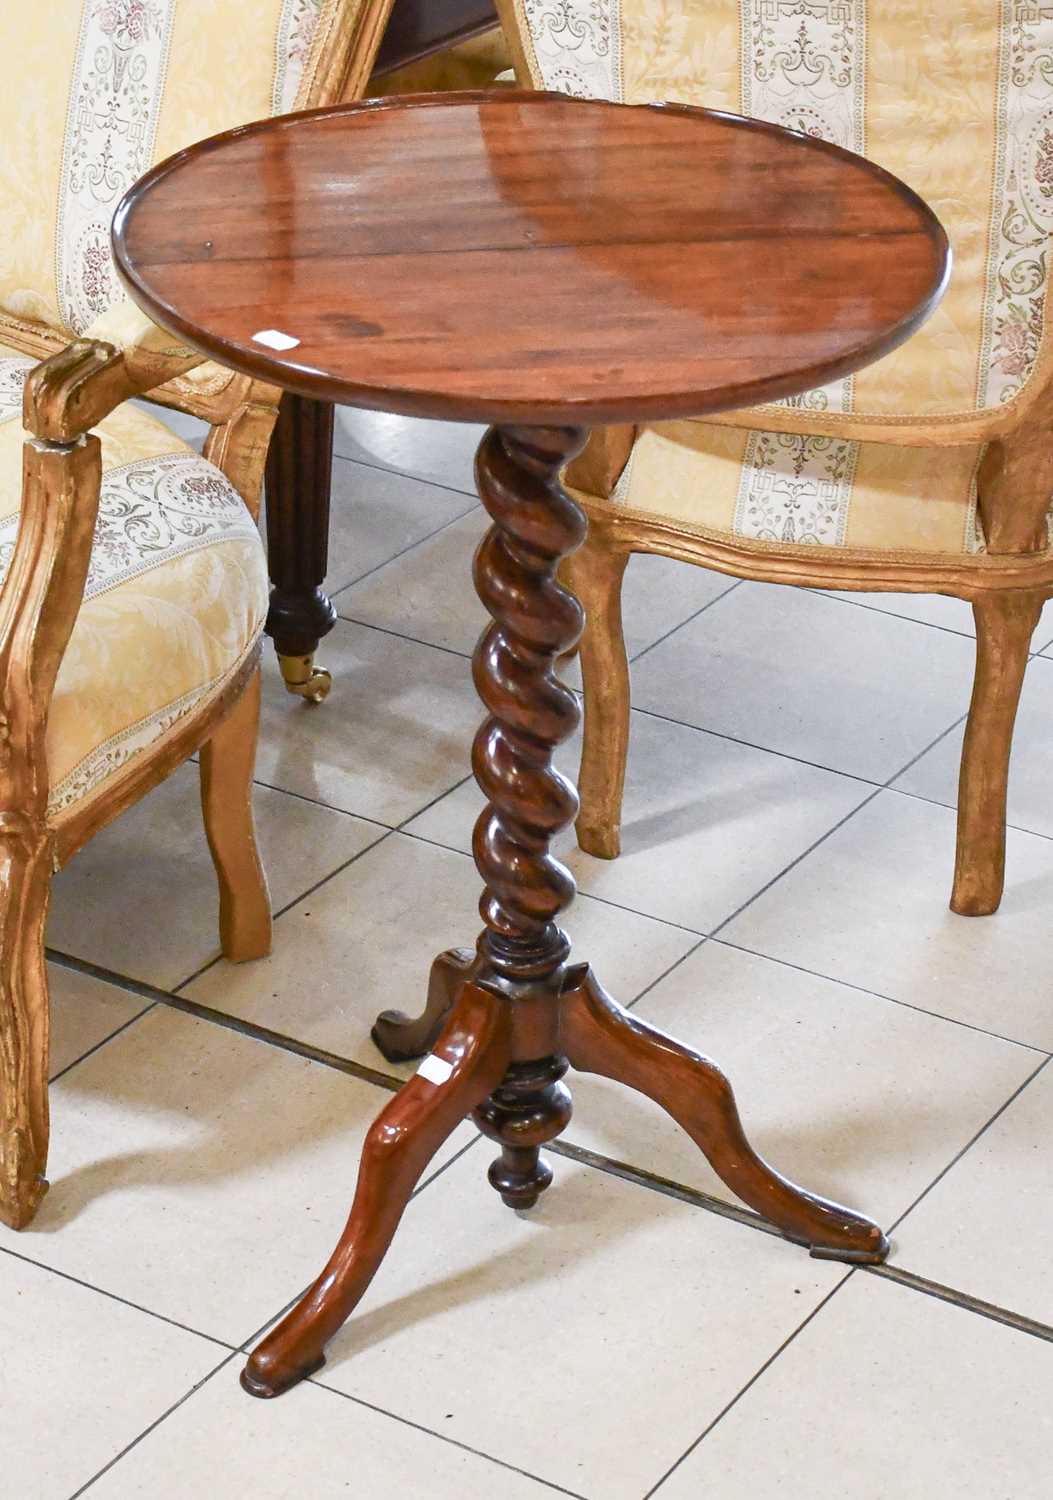 A Pair of Mahogany Tripod Tables, the circualr dished tops supported by a boldly turned standard and - Image 3 of 3